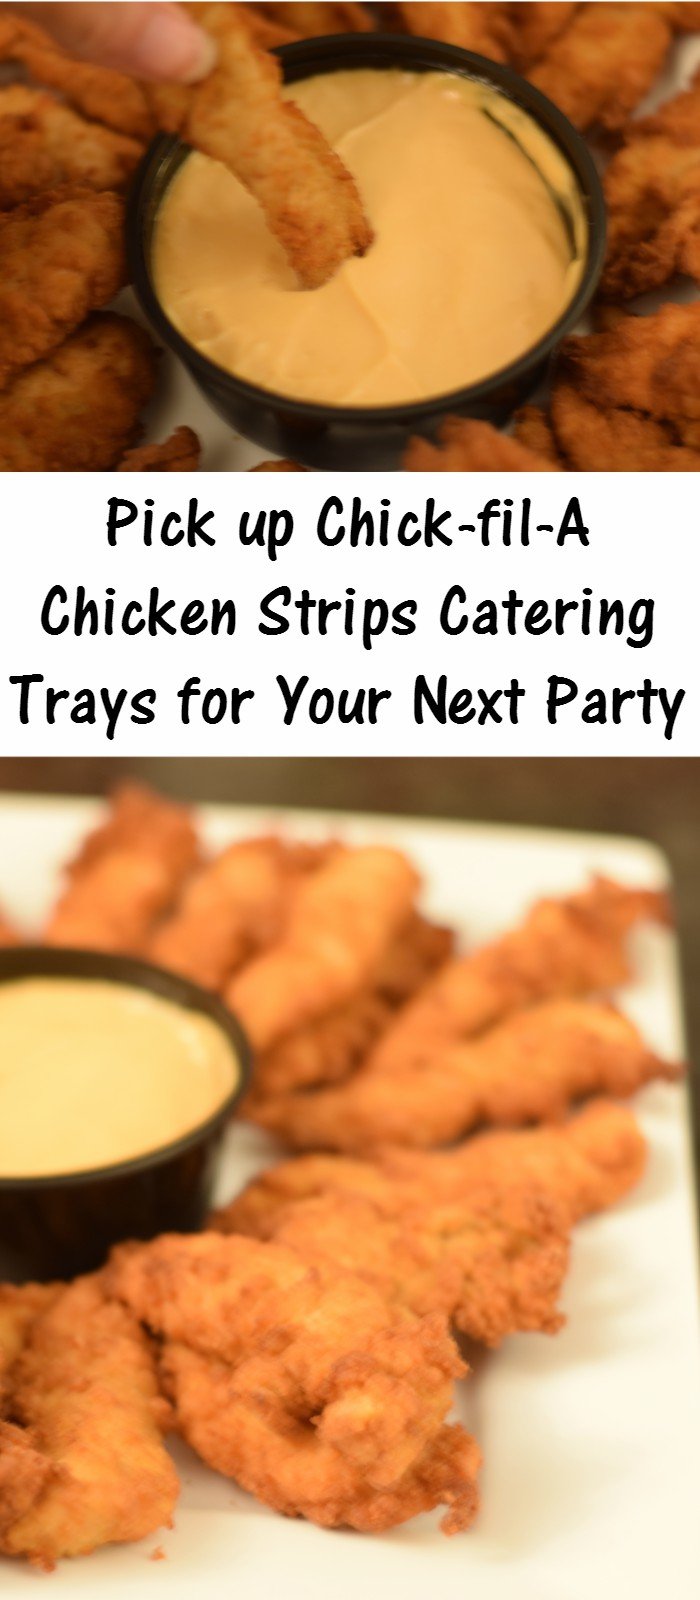 Chick-fil-A chicken strips catering tray for your next party. Easy options hot or cold, plus they can deliver. Make your party food easy this time